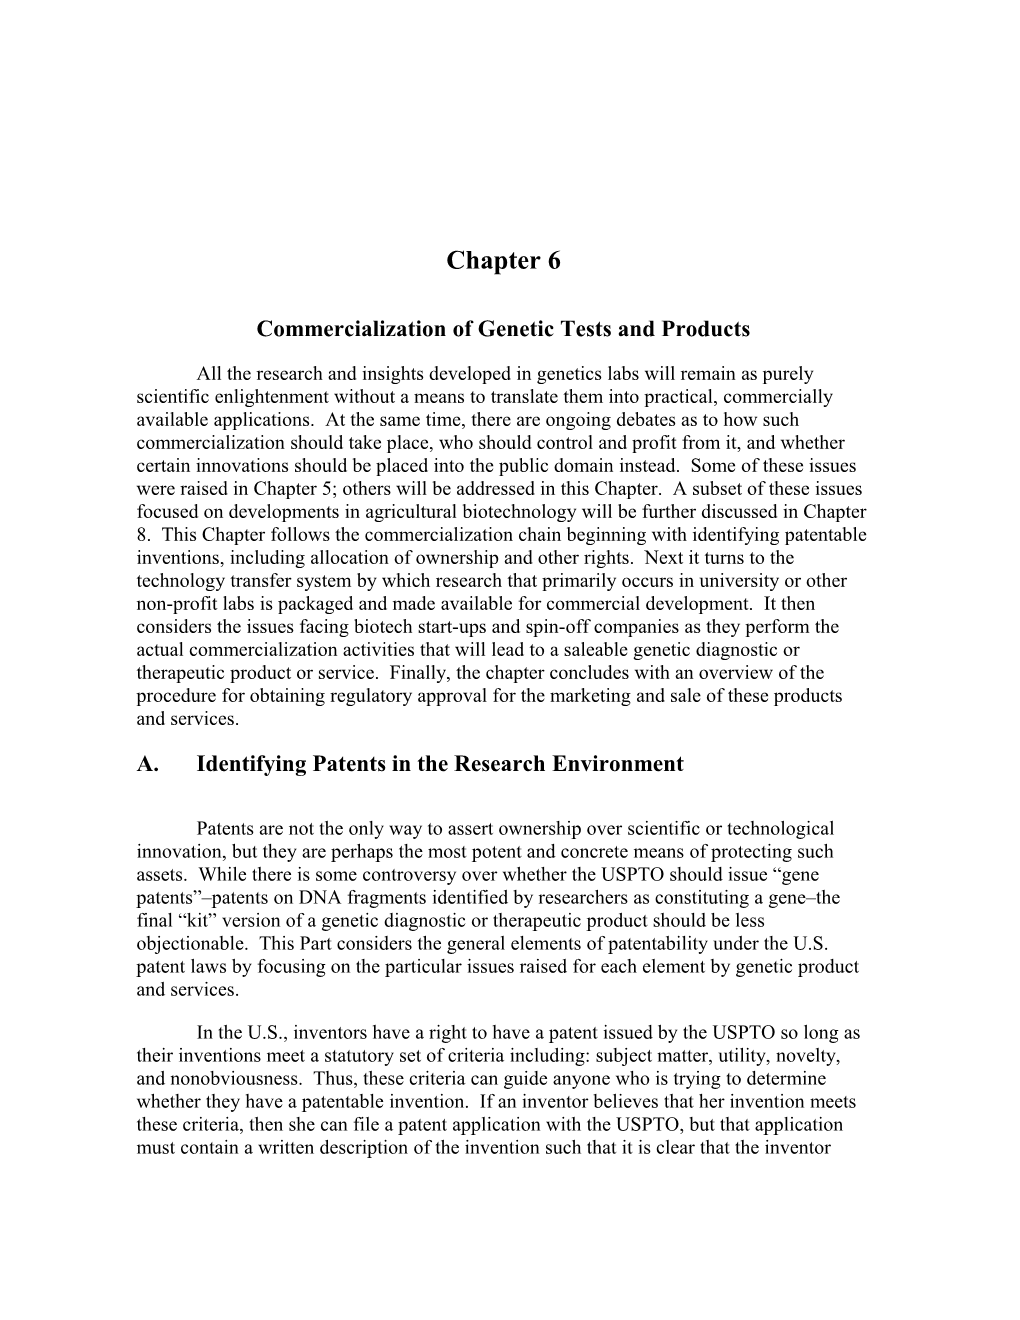 Genetic Technologies and the Law: Cases and Materials